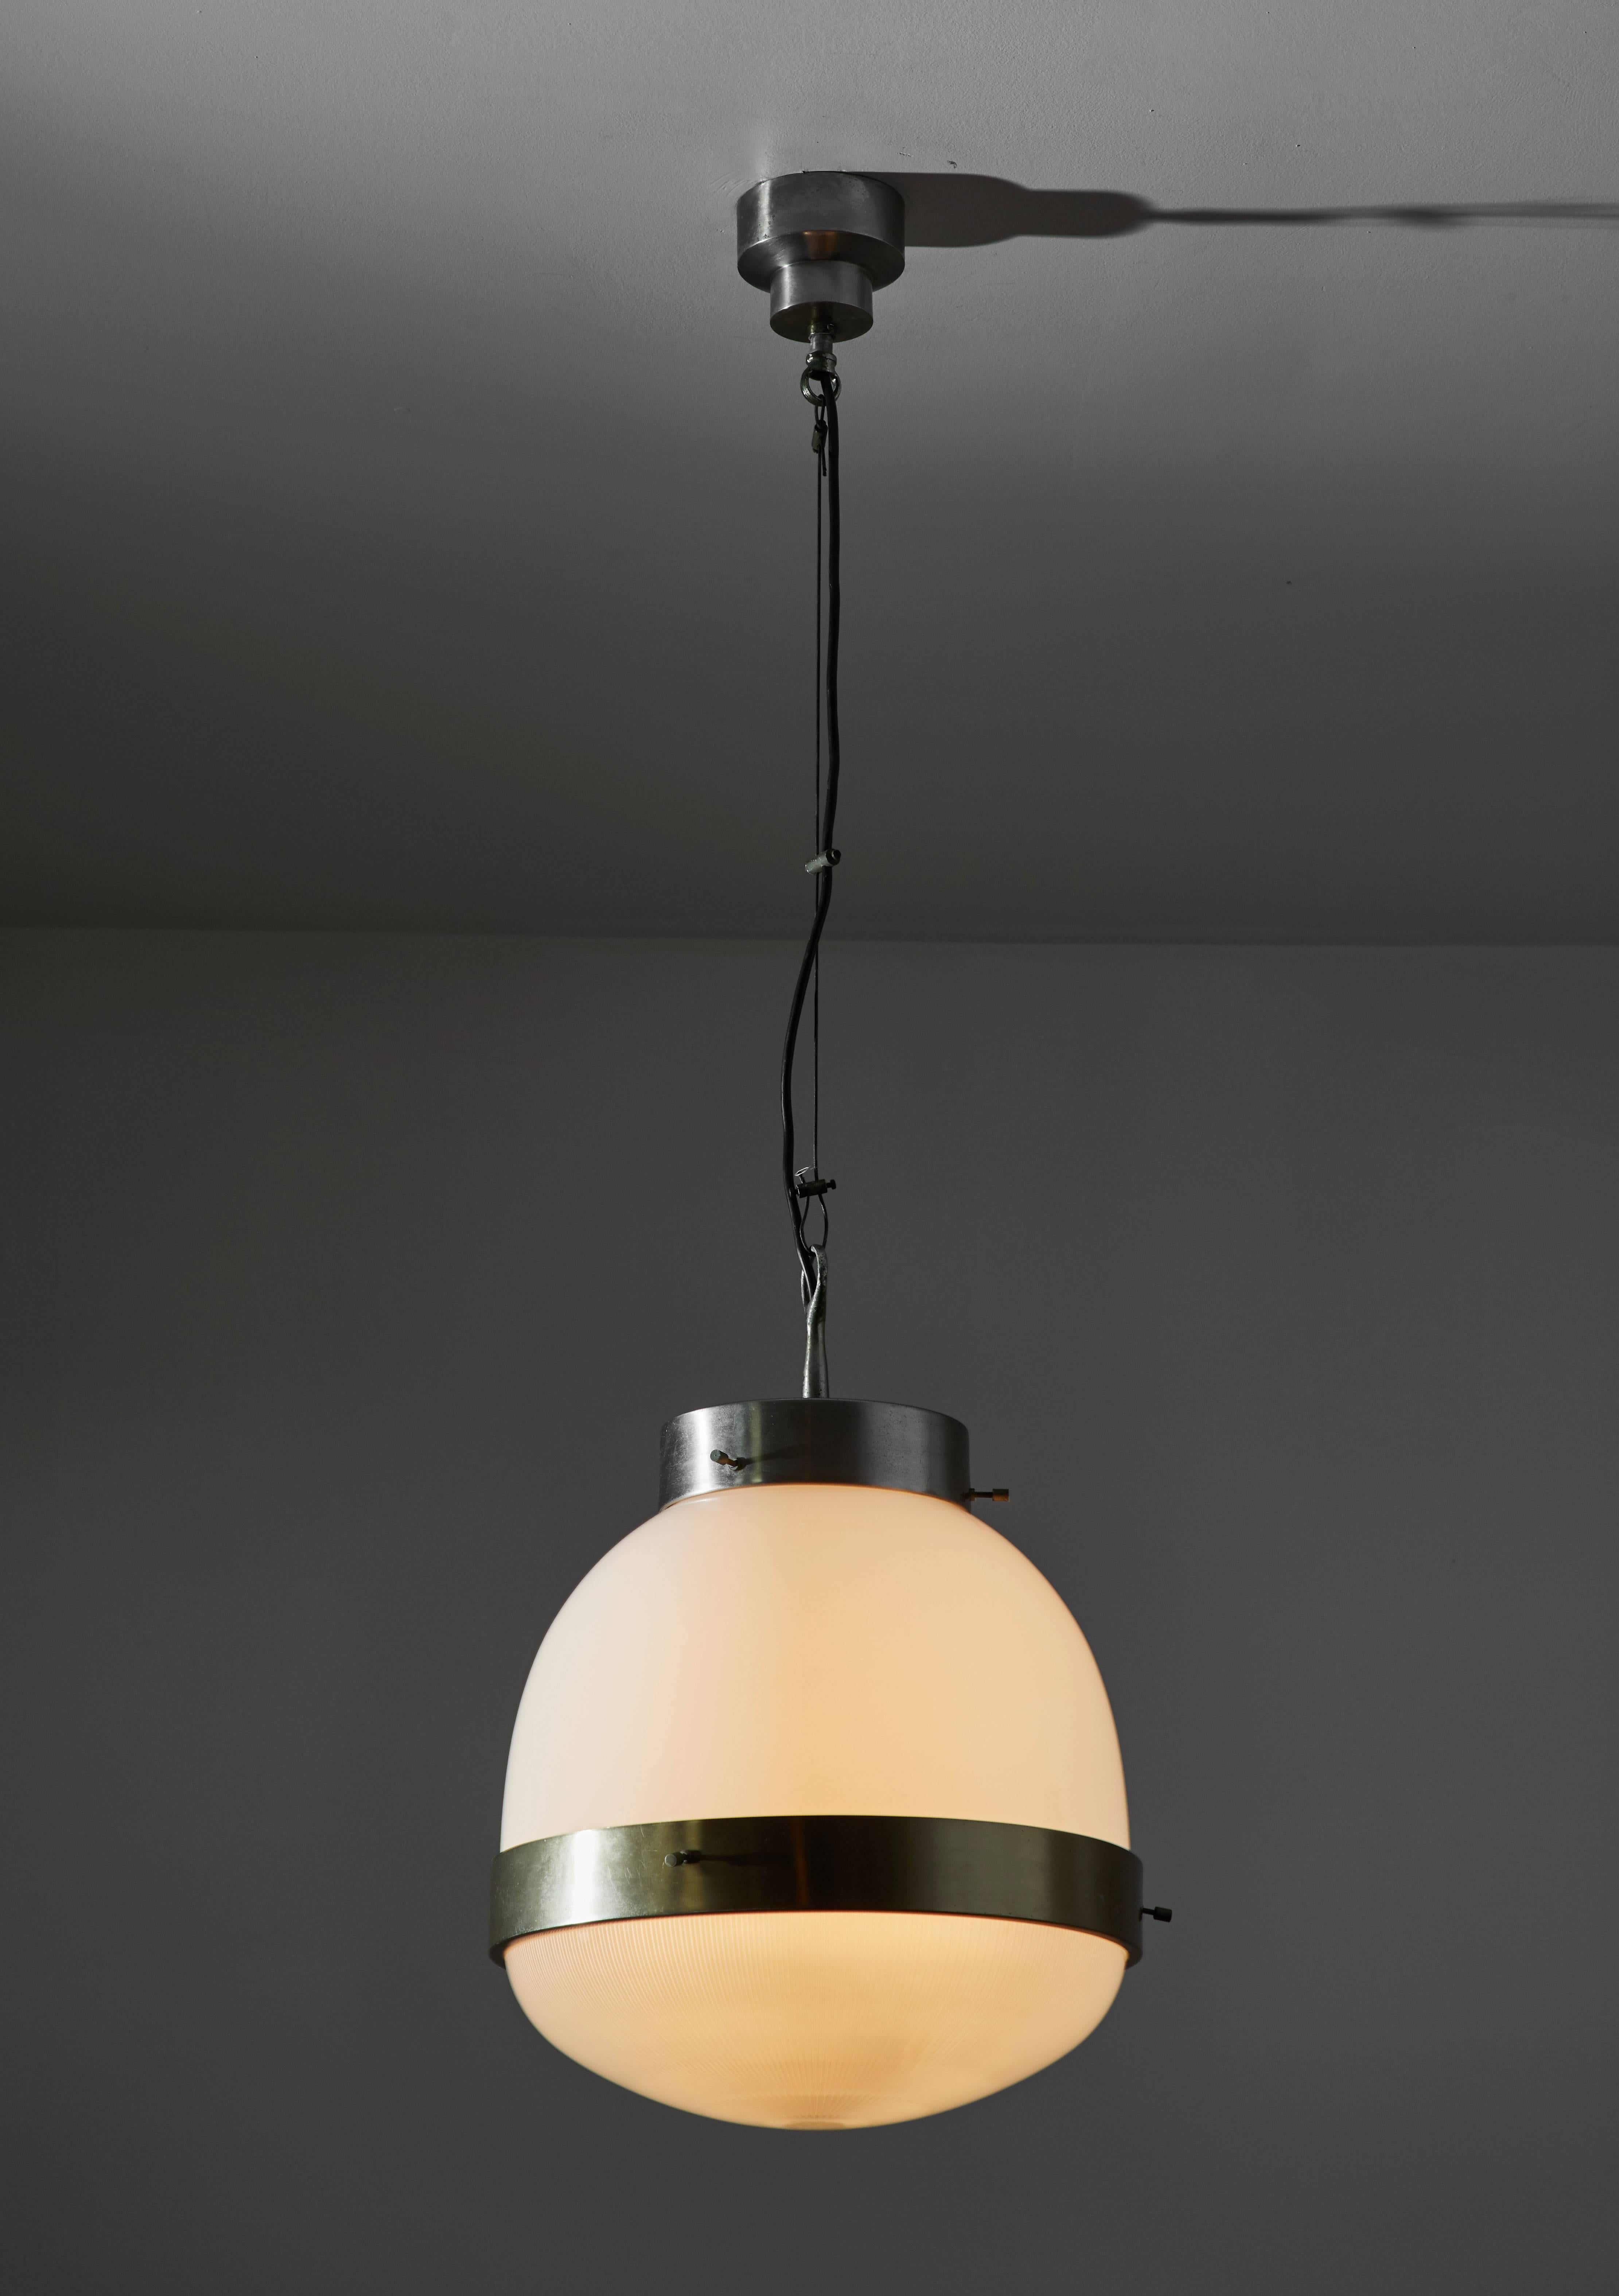 Three Delta Grande suspension lamps by Sergio Mazza for Artemide. Designed and manufactured in Italy, circa 1960s. Brass and opaline glass fix shade with Holophane glass diffusers. Wired for US junction boxes. Each light takes one E27 100w maximum